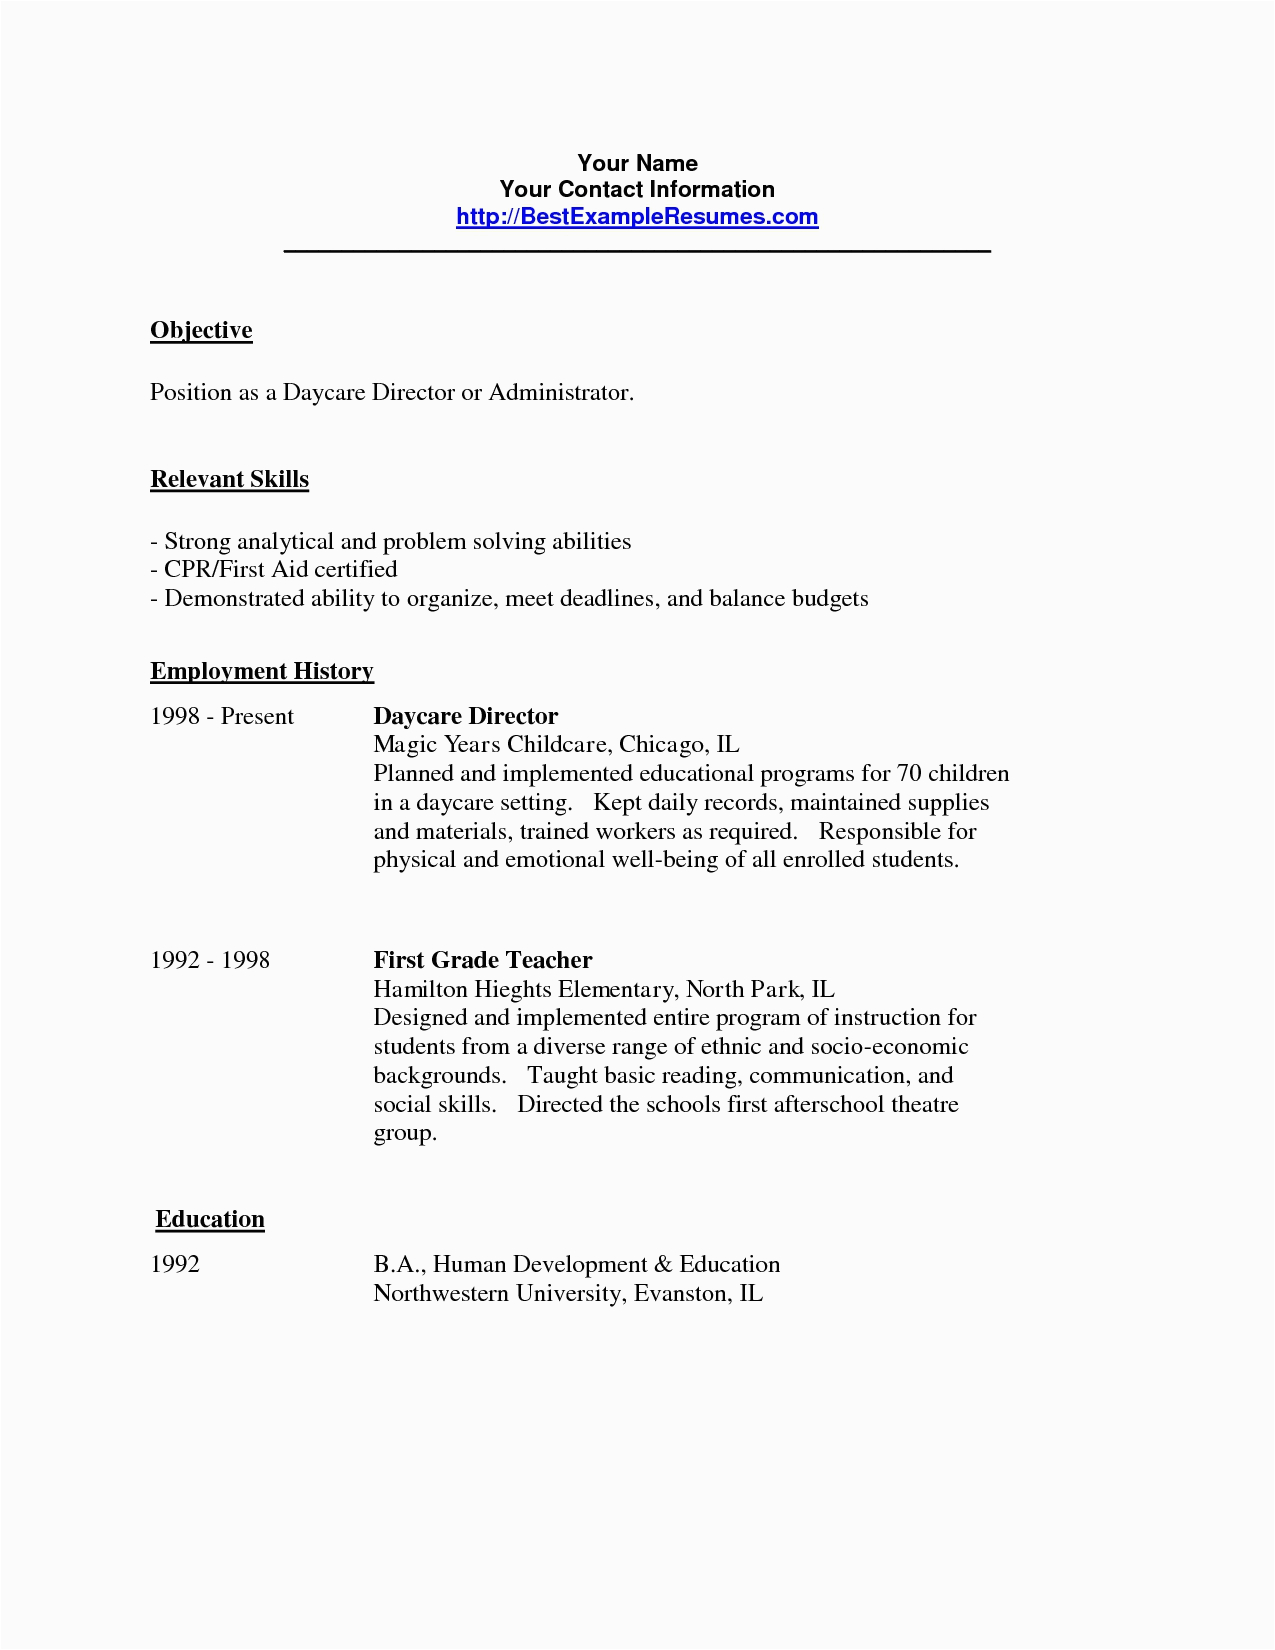 Resume Sample for Child Care Provider 13 14 Childcare Provider Resume southbeachcafesf